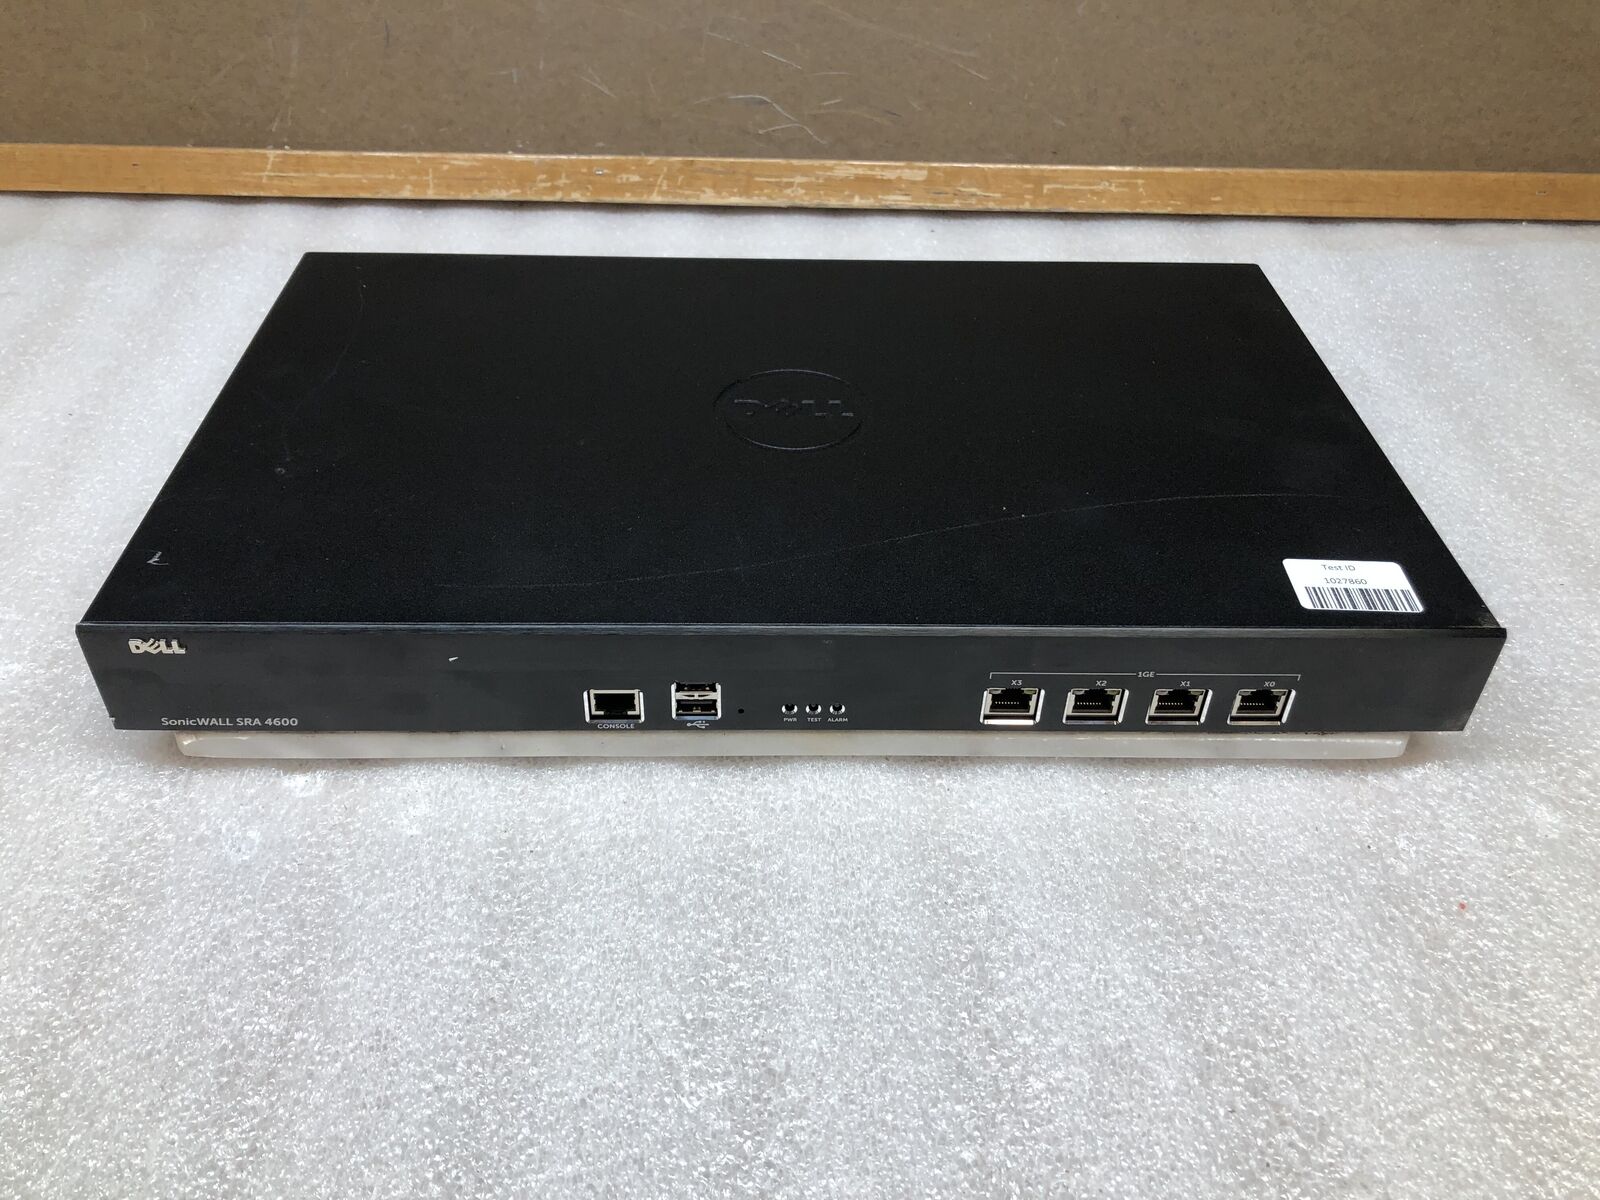 Dell SonicWall SRA 4600 4-Port Gigabyte Secure Remote Access Firewall